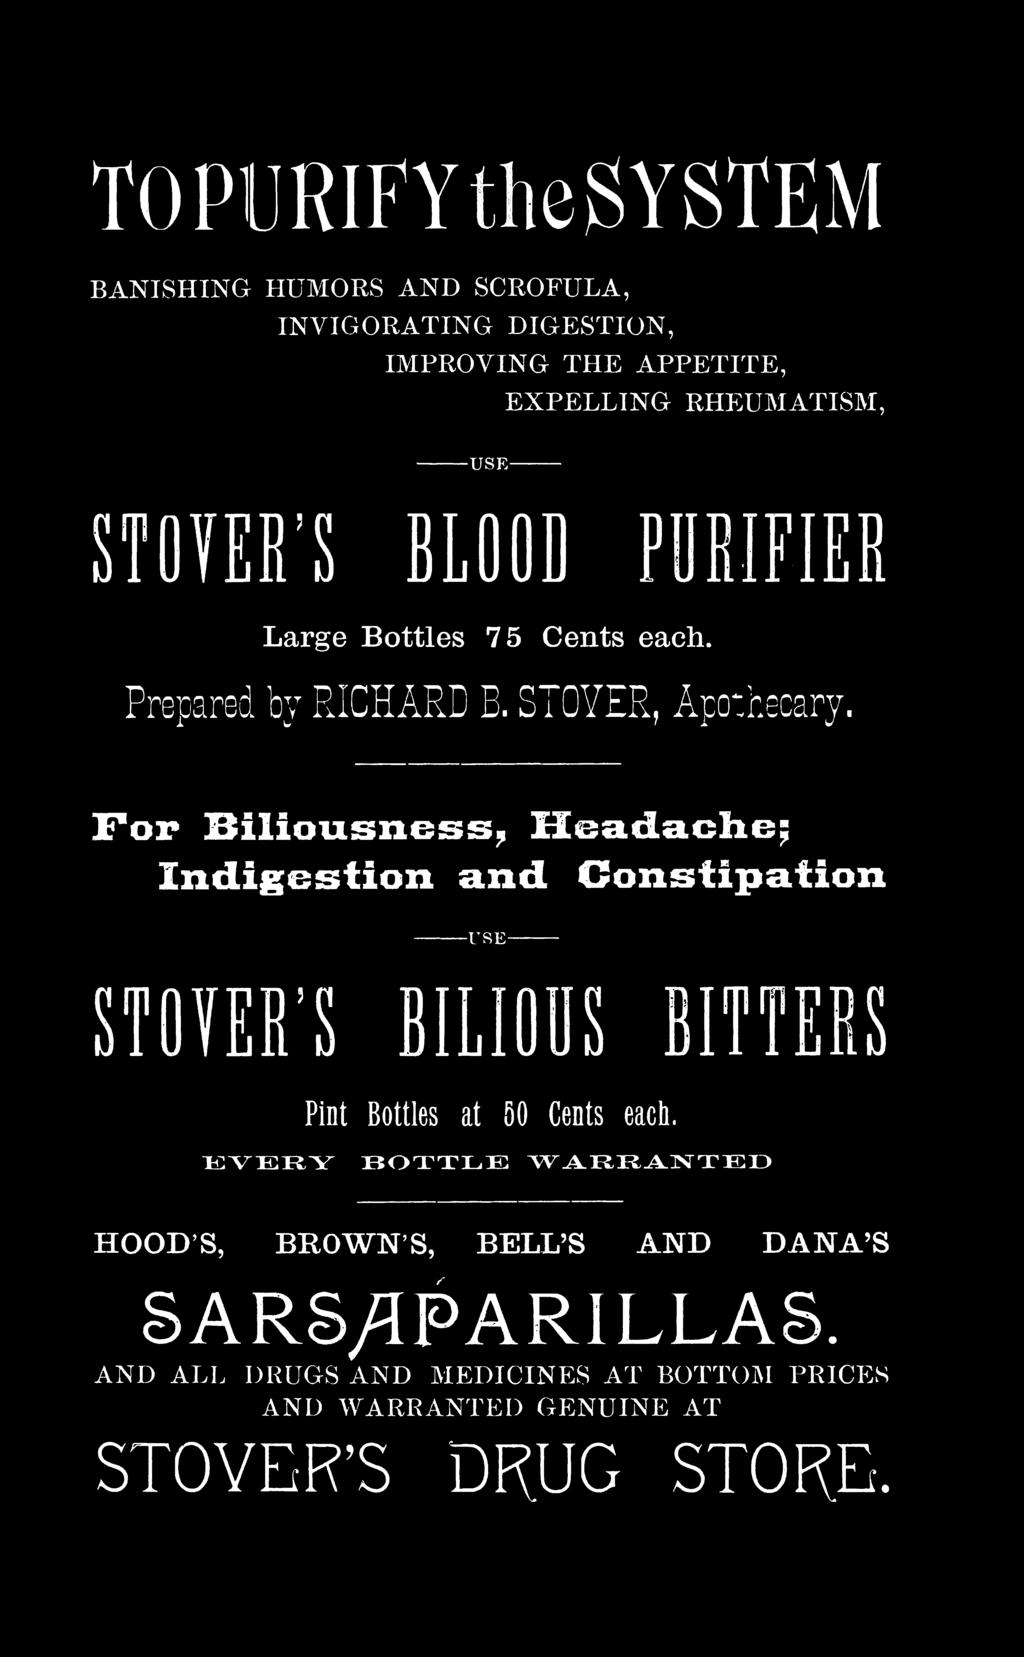 For Biliousness, Headache; Indigestion and Constipation * r f A USE STOVER S BILIOUS BITTERS Pint Bottles at 50 Cents each.